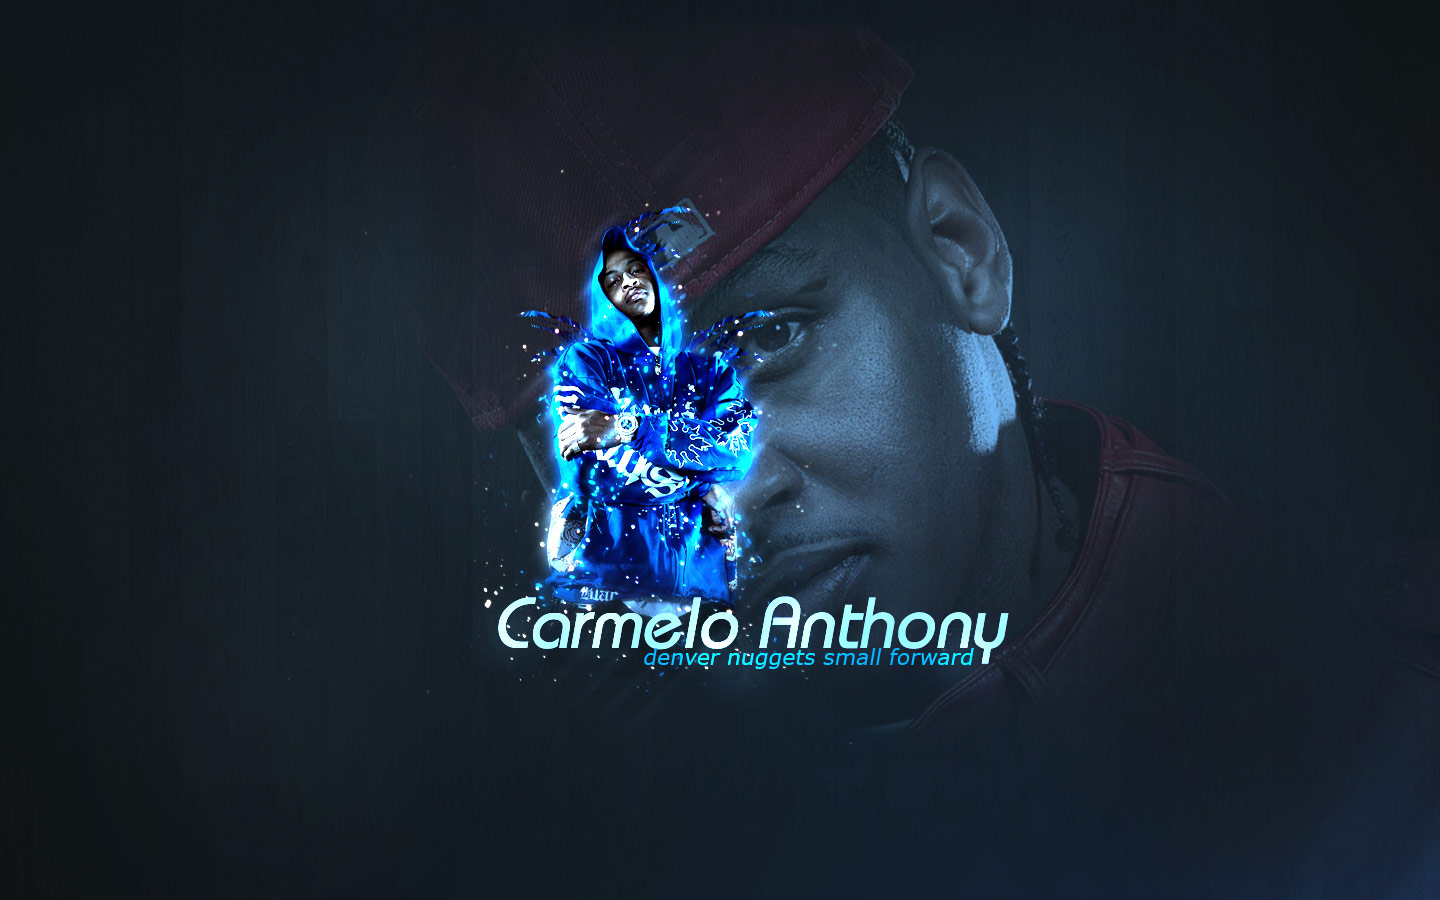 Carmelo Anthony Simple Wallpaper Two Pictures Of Him One Is